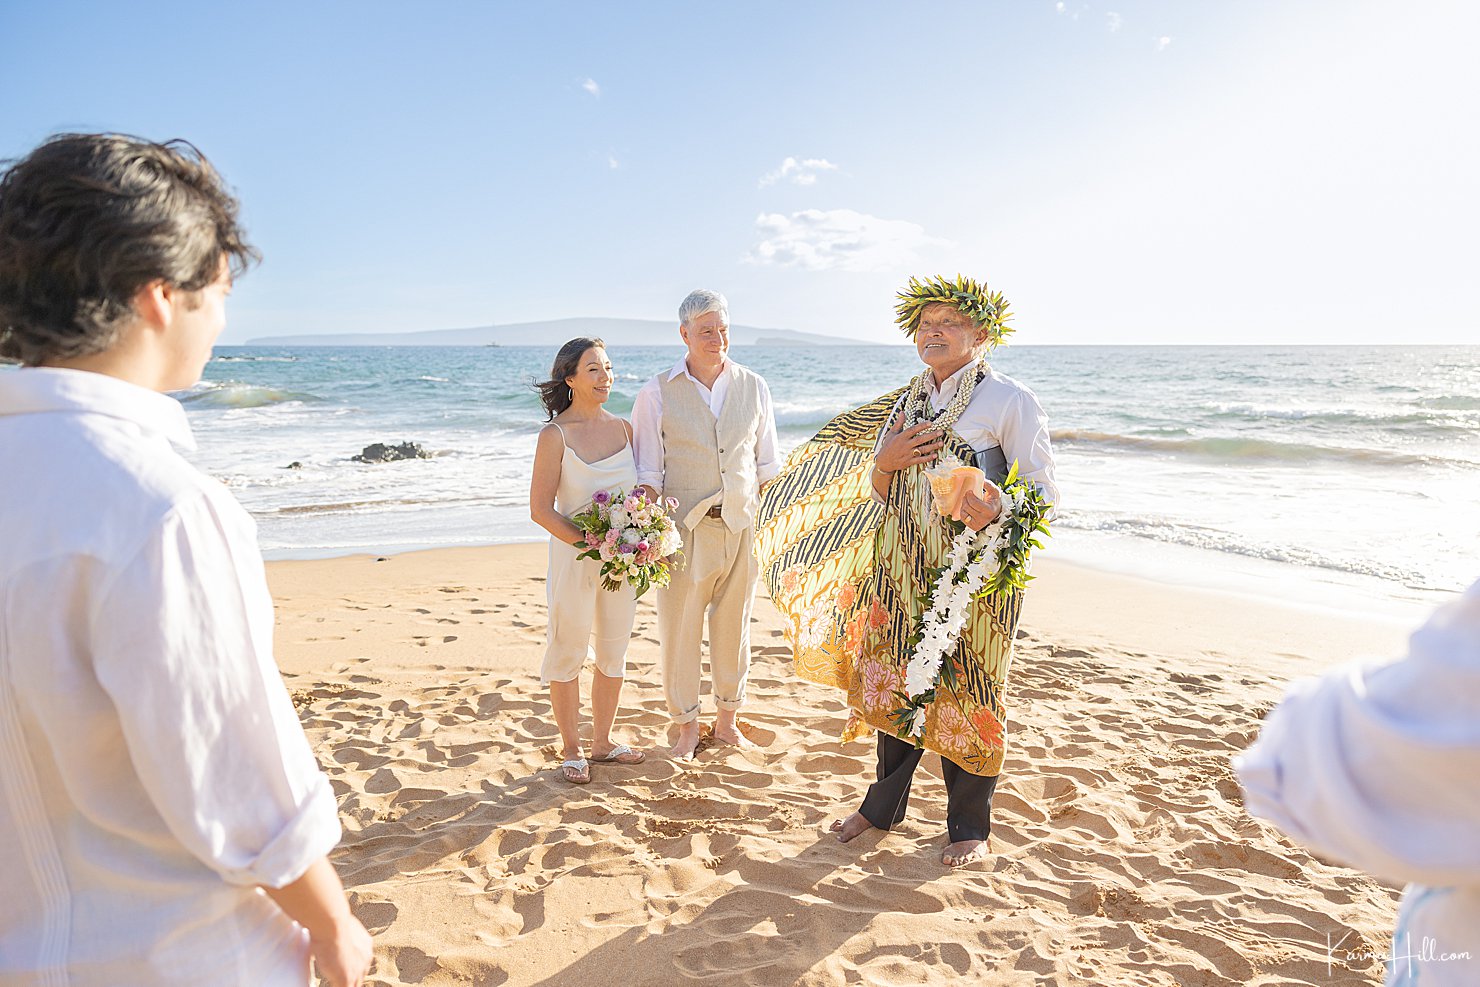 Get Married in Maui with Simple Maui Wedding